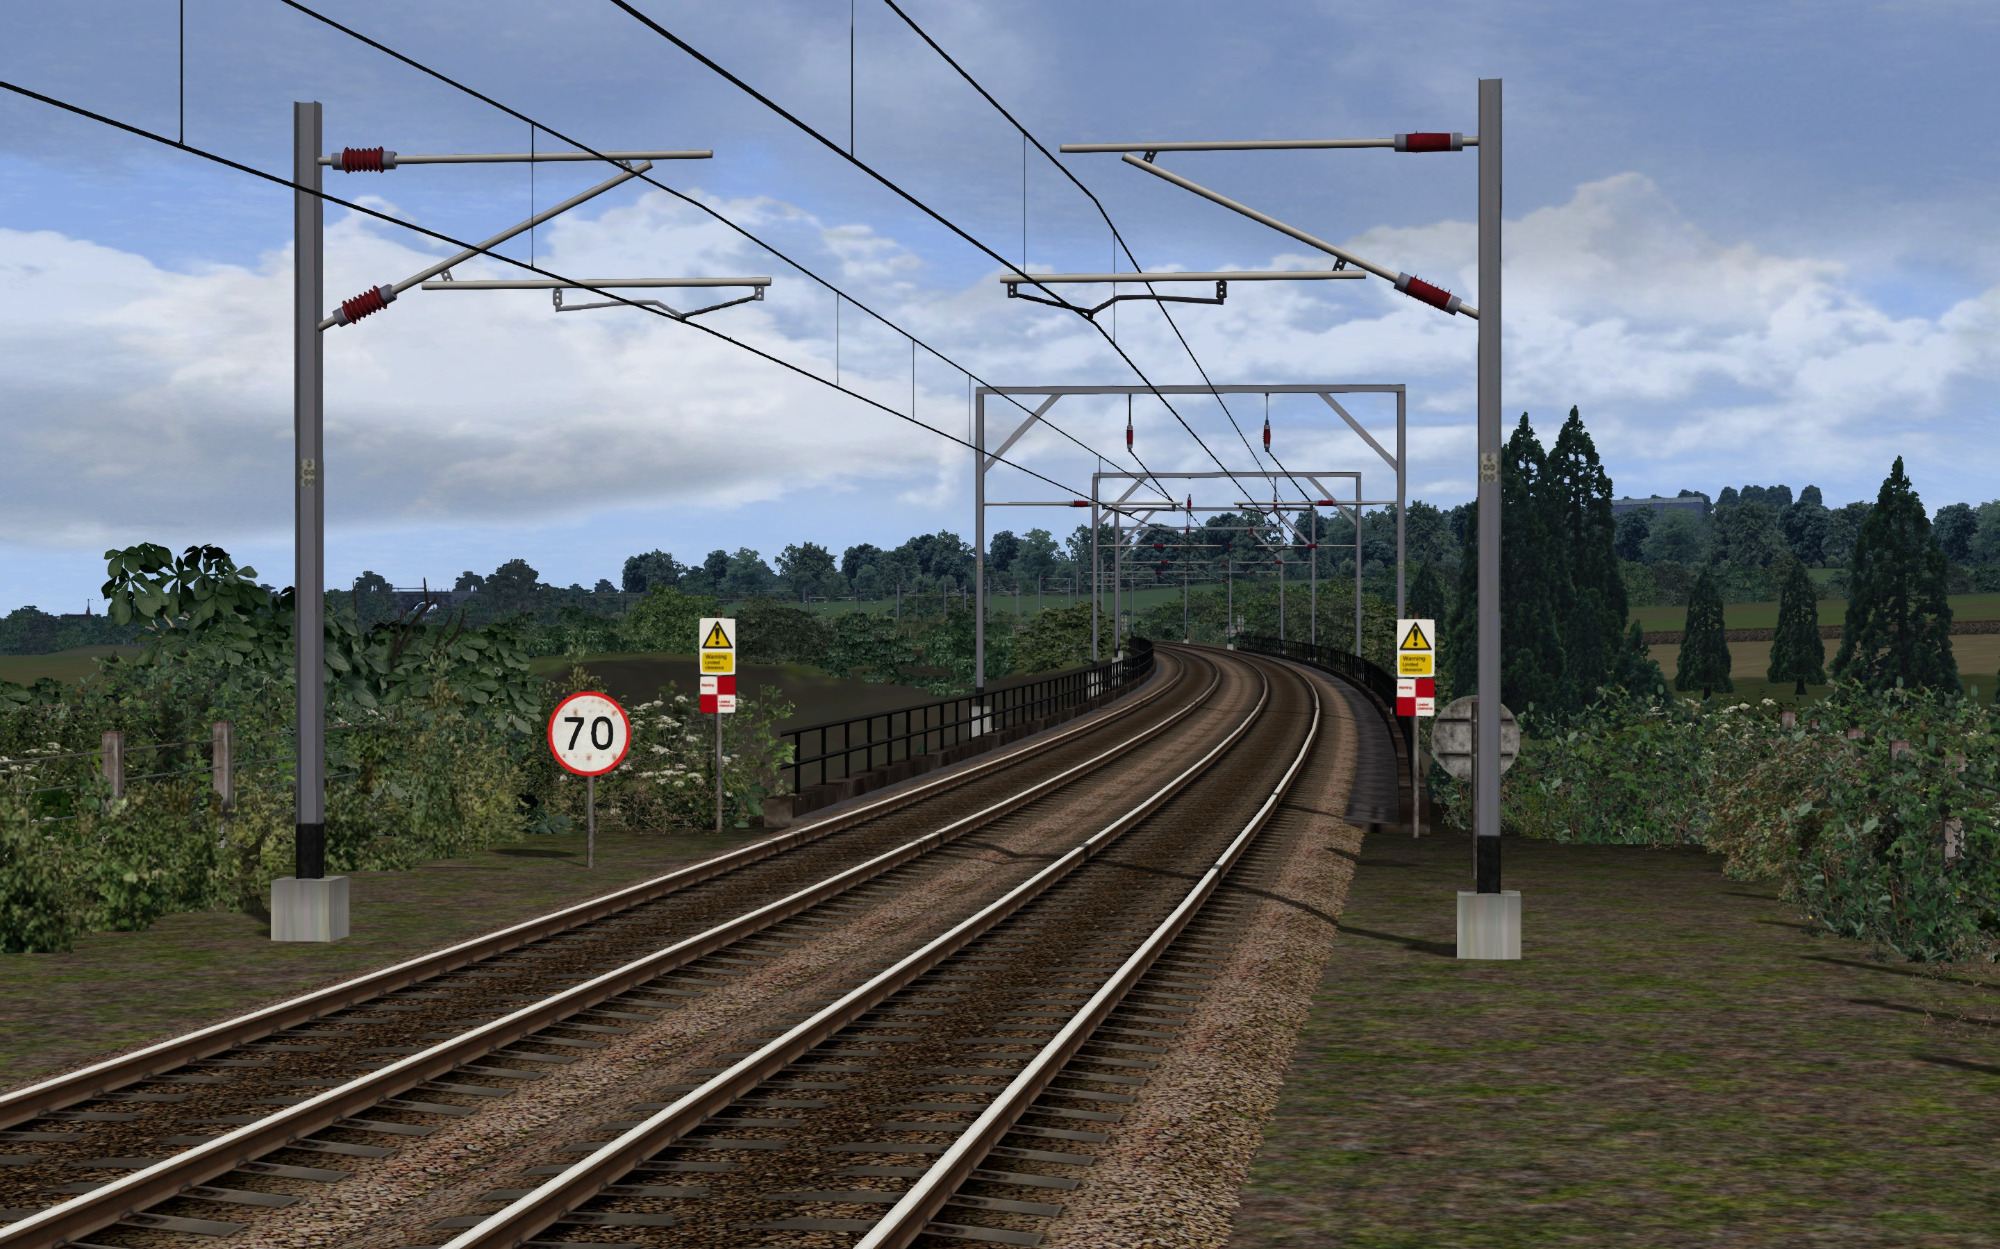 Image showing screenshot of the free Carstairs extension of this route, available here at DPSimulation